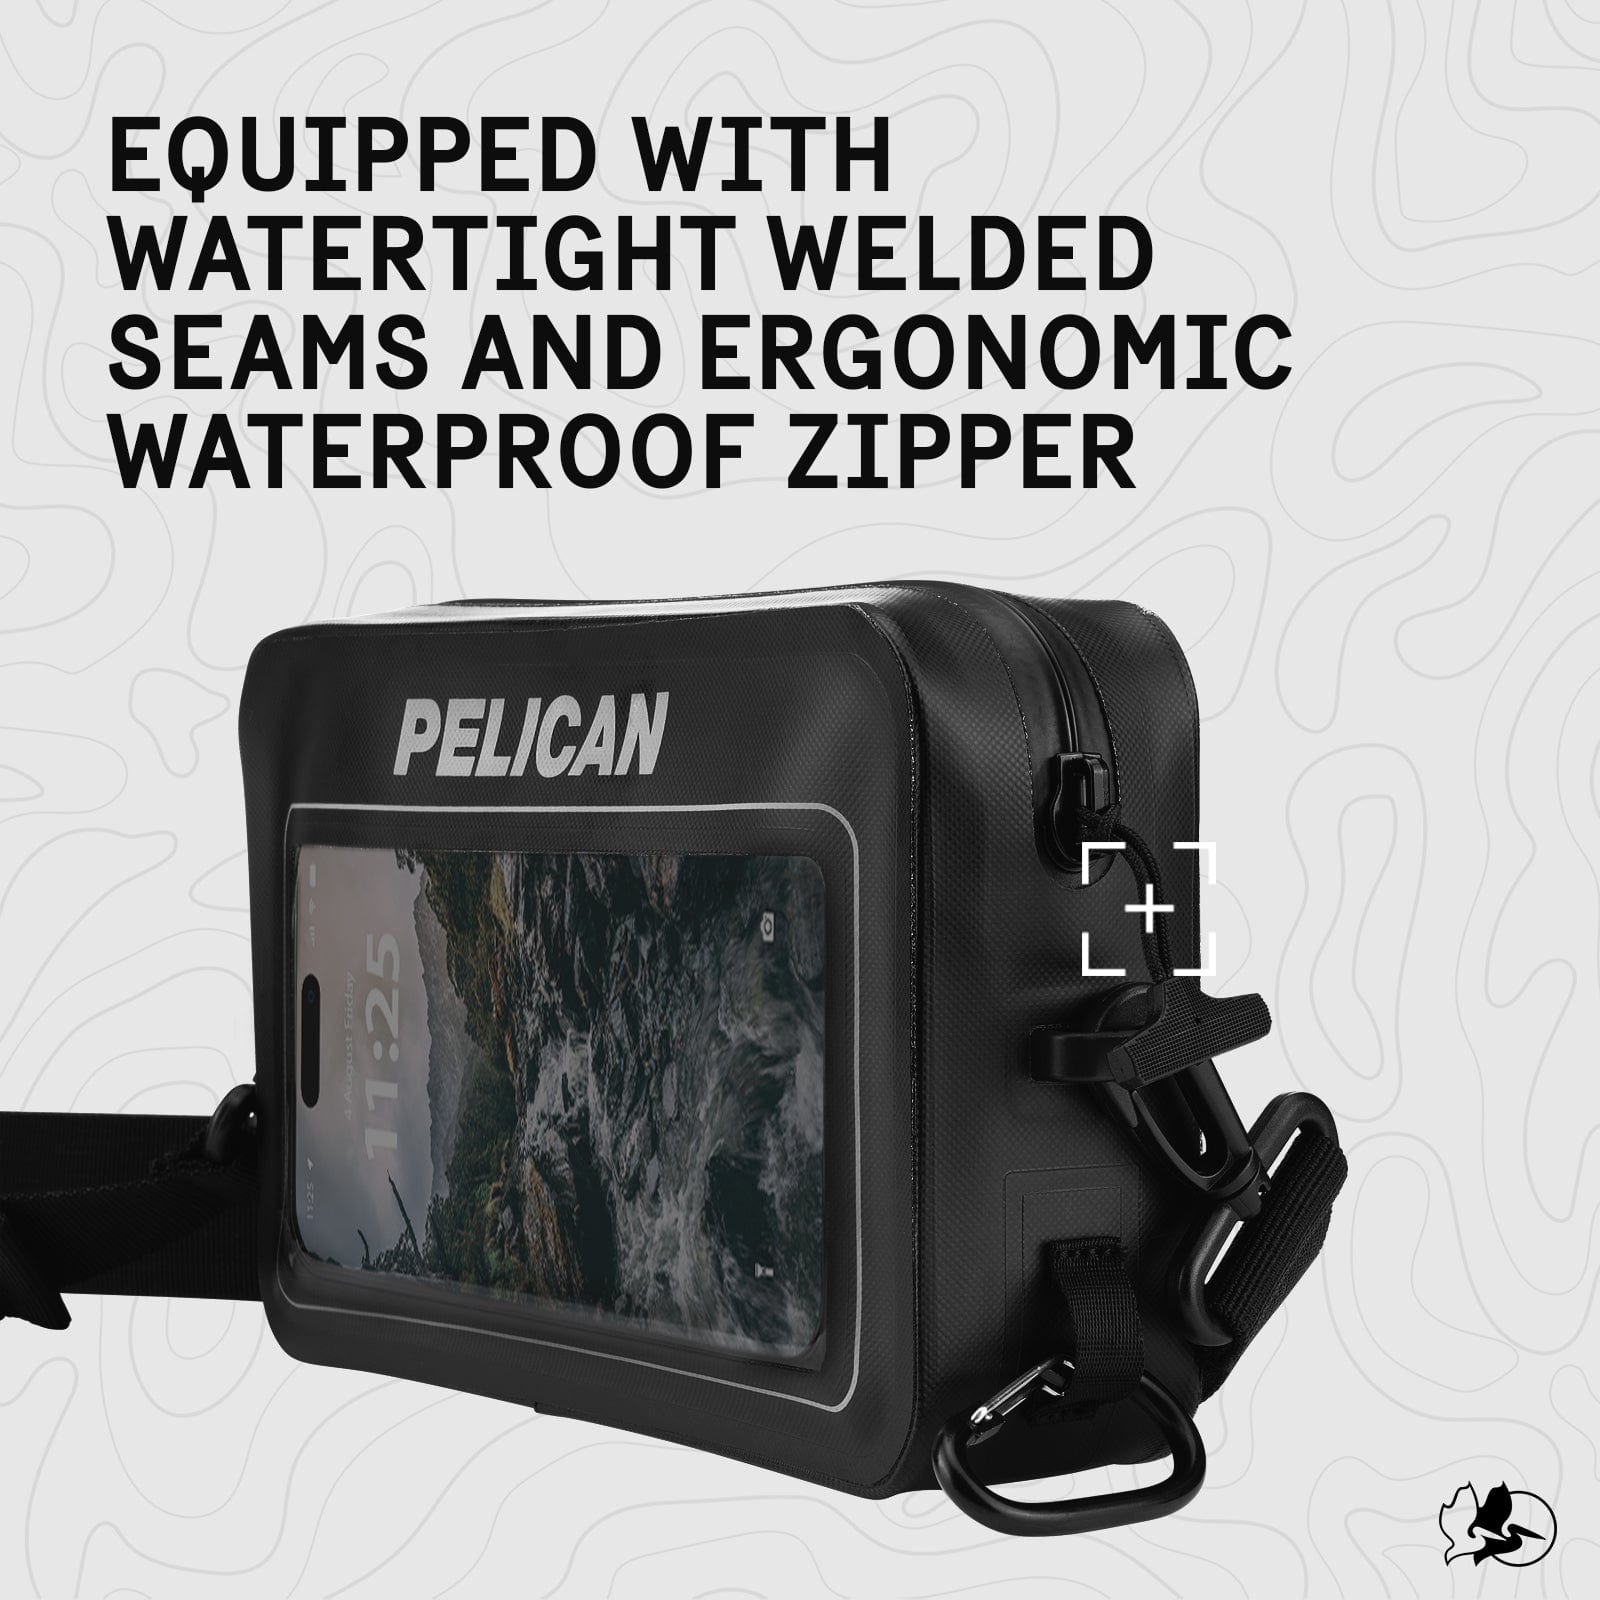 EQUIPPED WITH WATERTIGHT WELDED SEAMS AND ERGONOMIC WATERPROOF ZIPPER